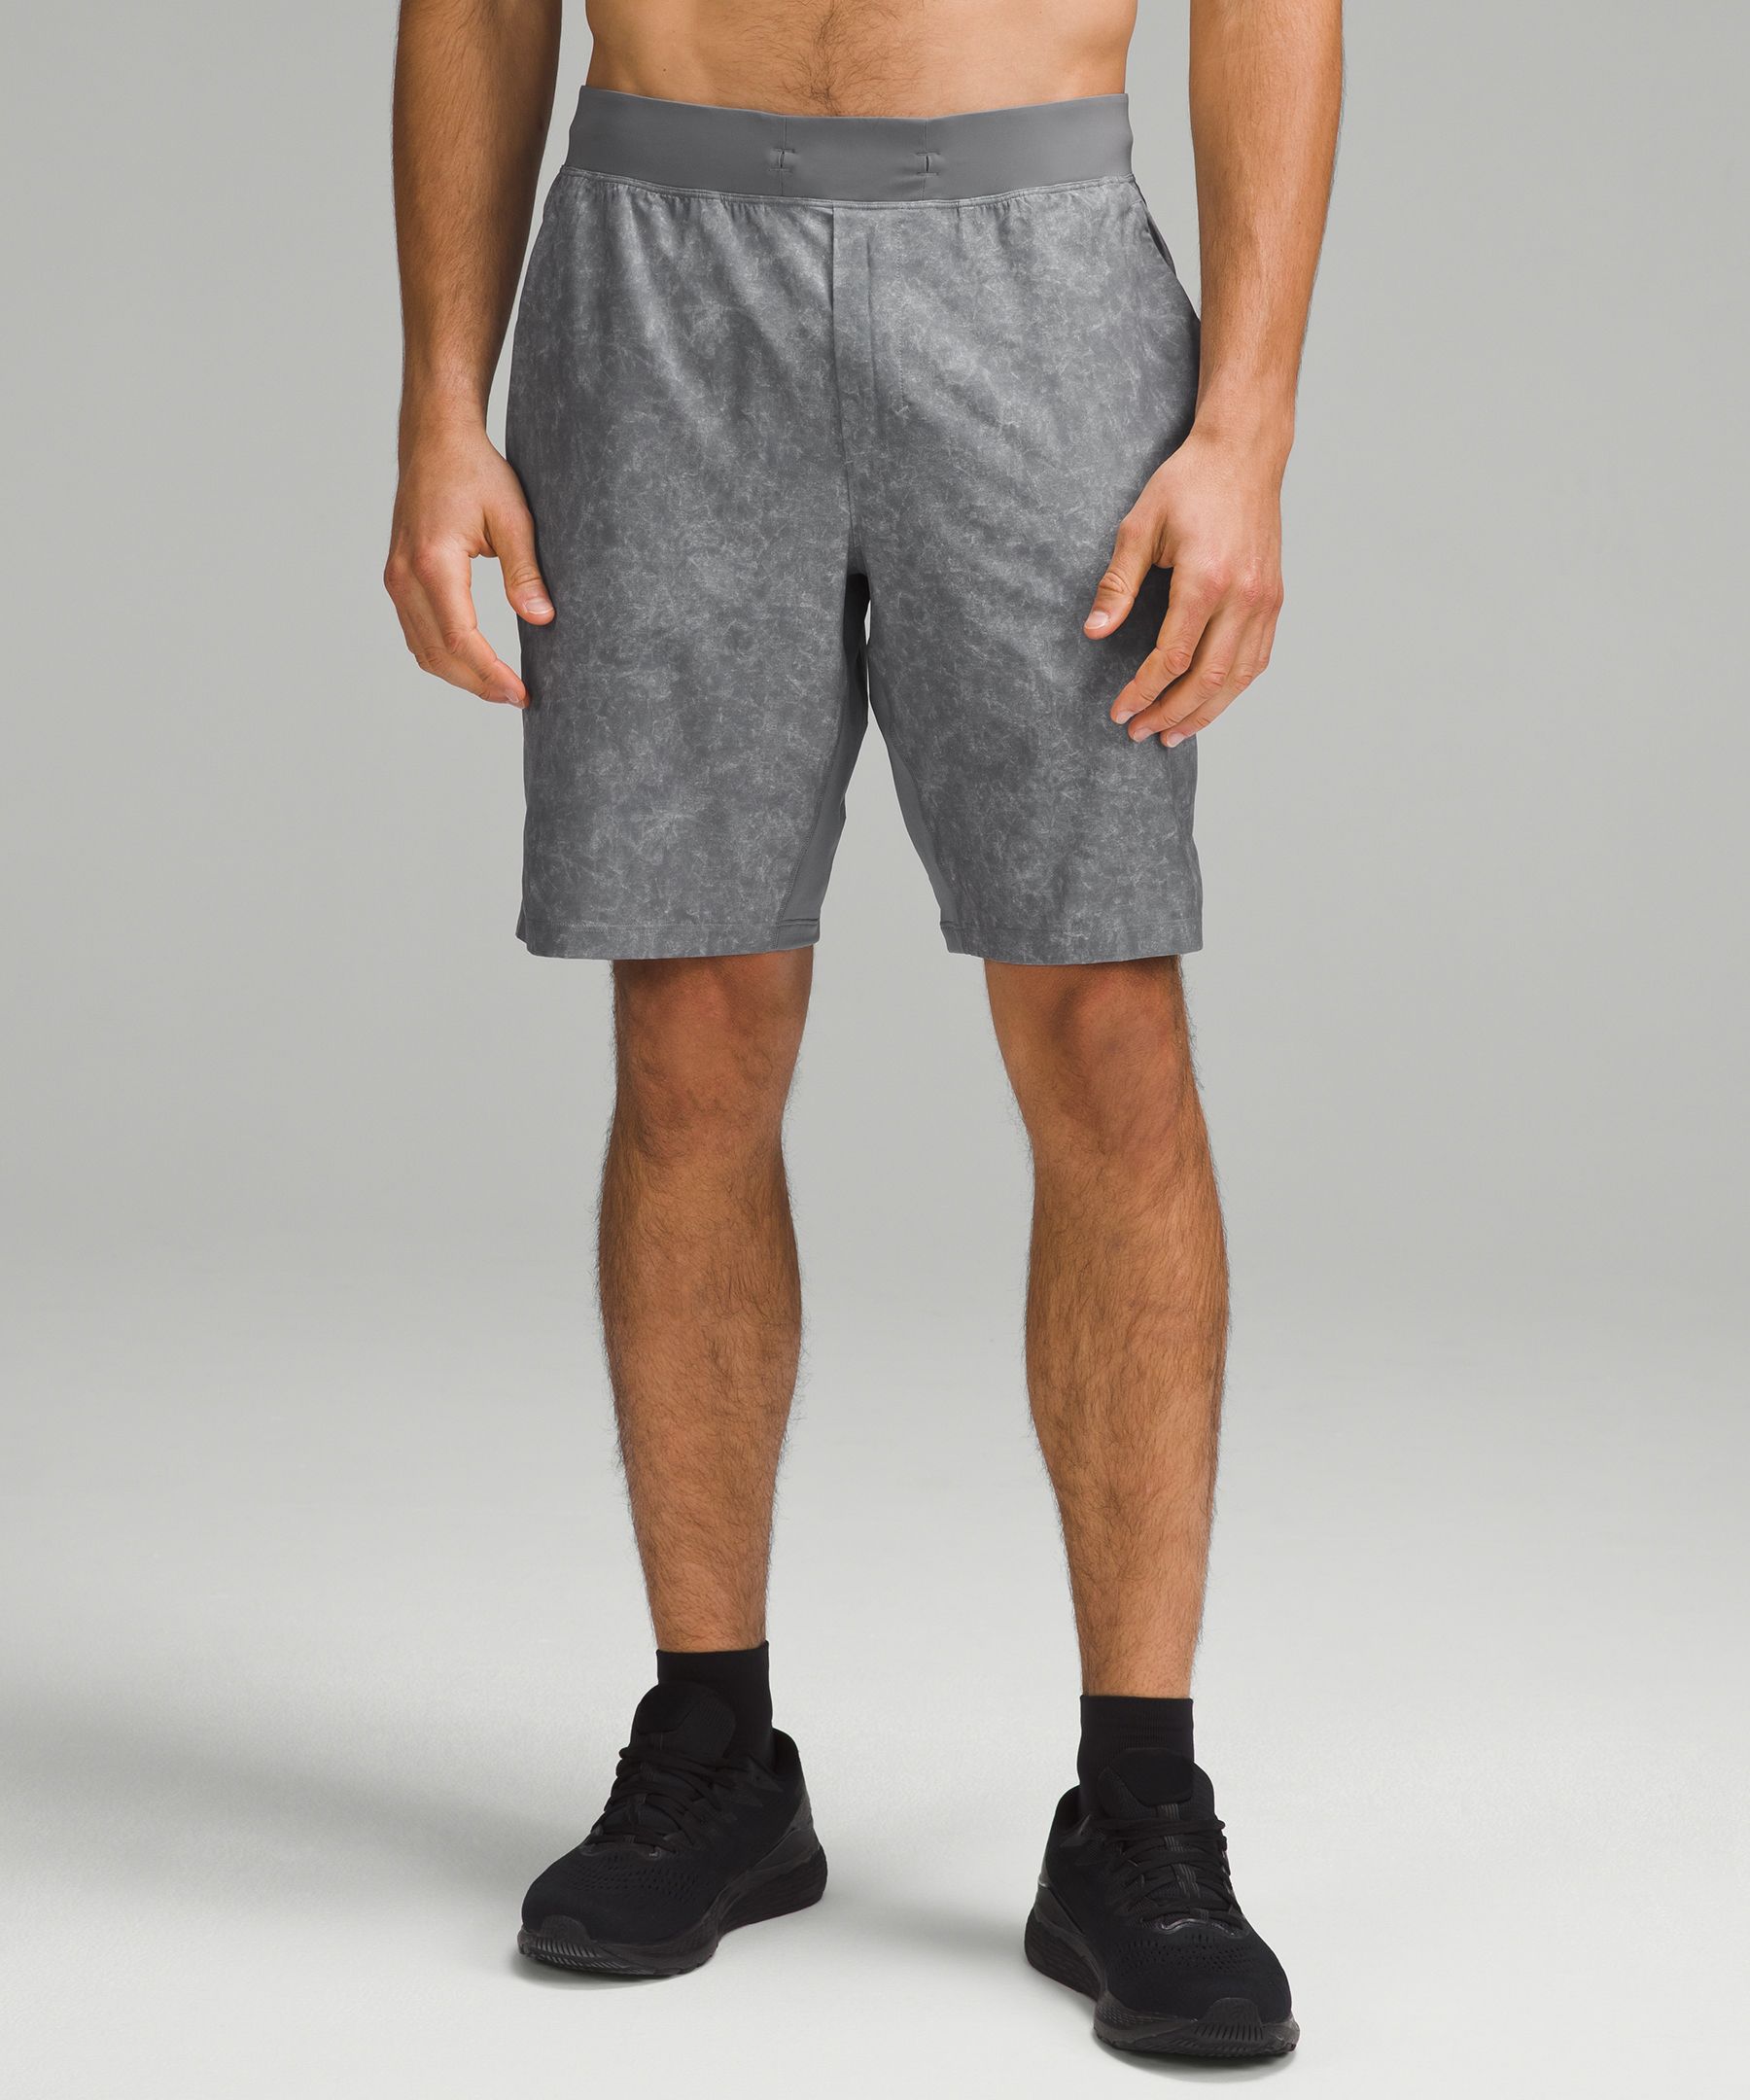 over and above train short lululemon